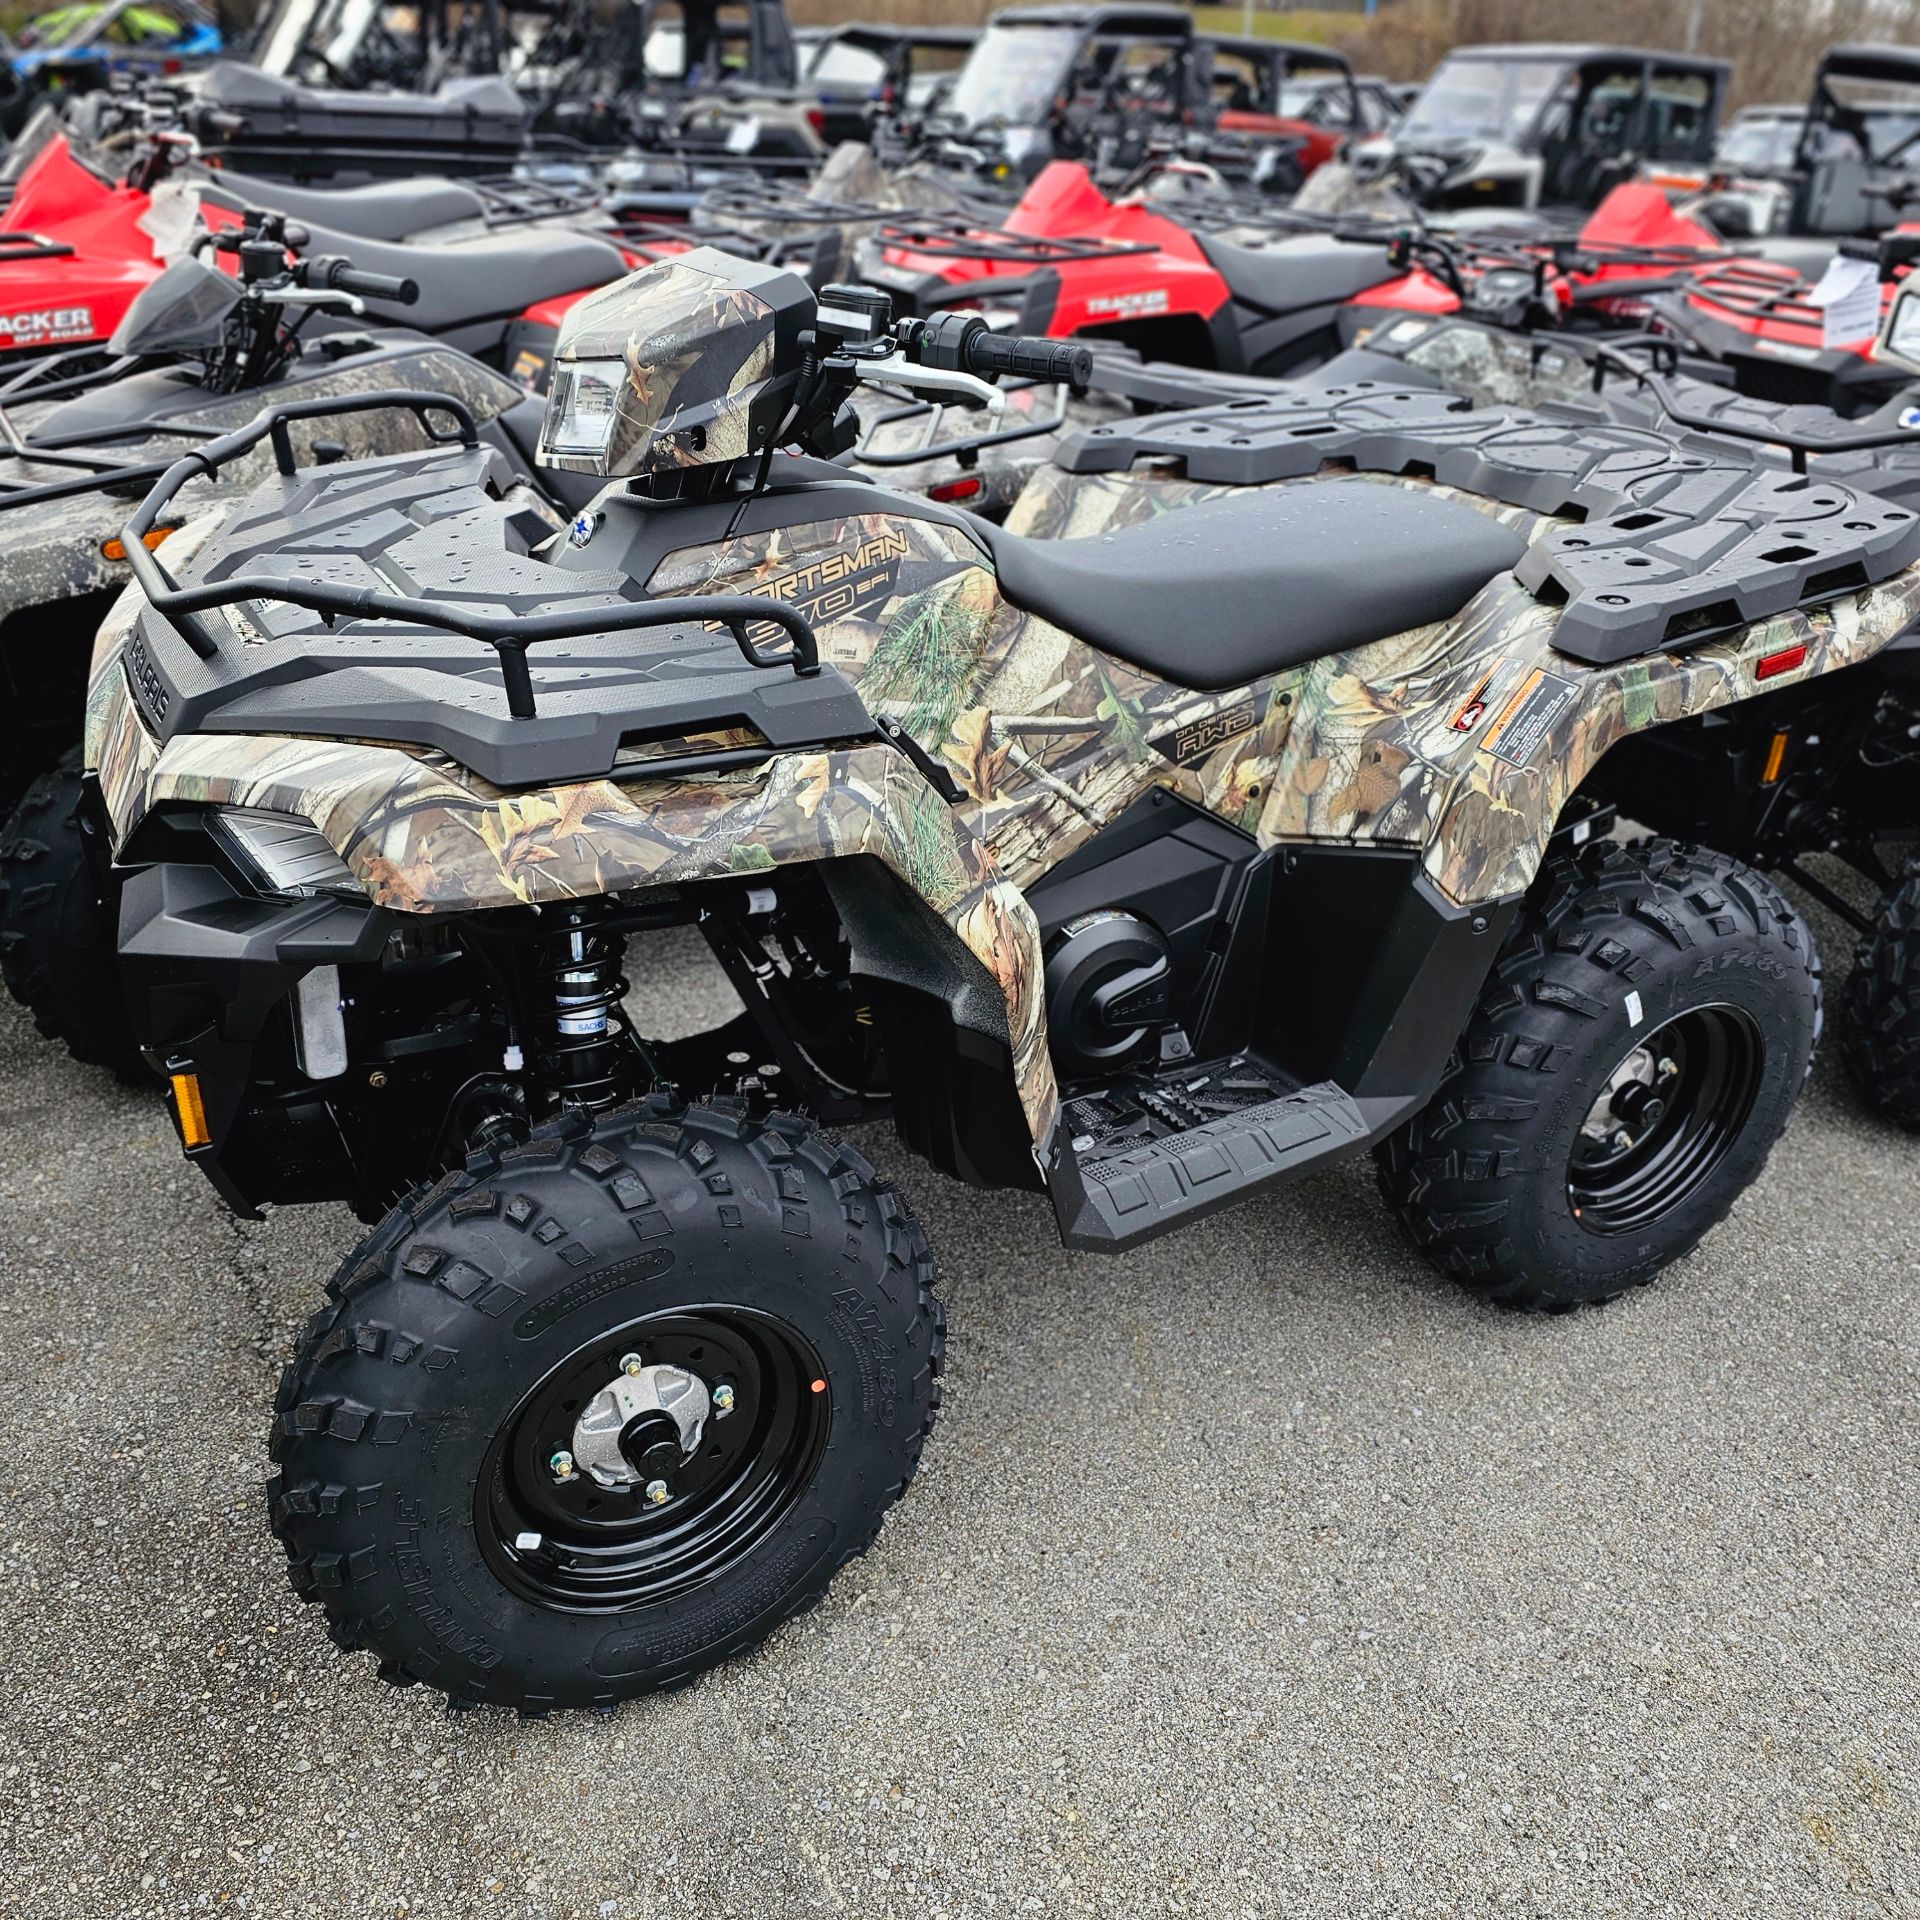 2024 Polaris Sportsman 570 in Knoxville, Tennessee - Photo 1